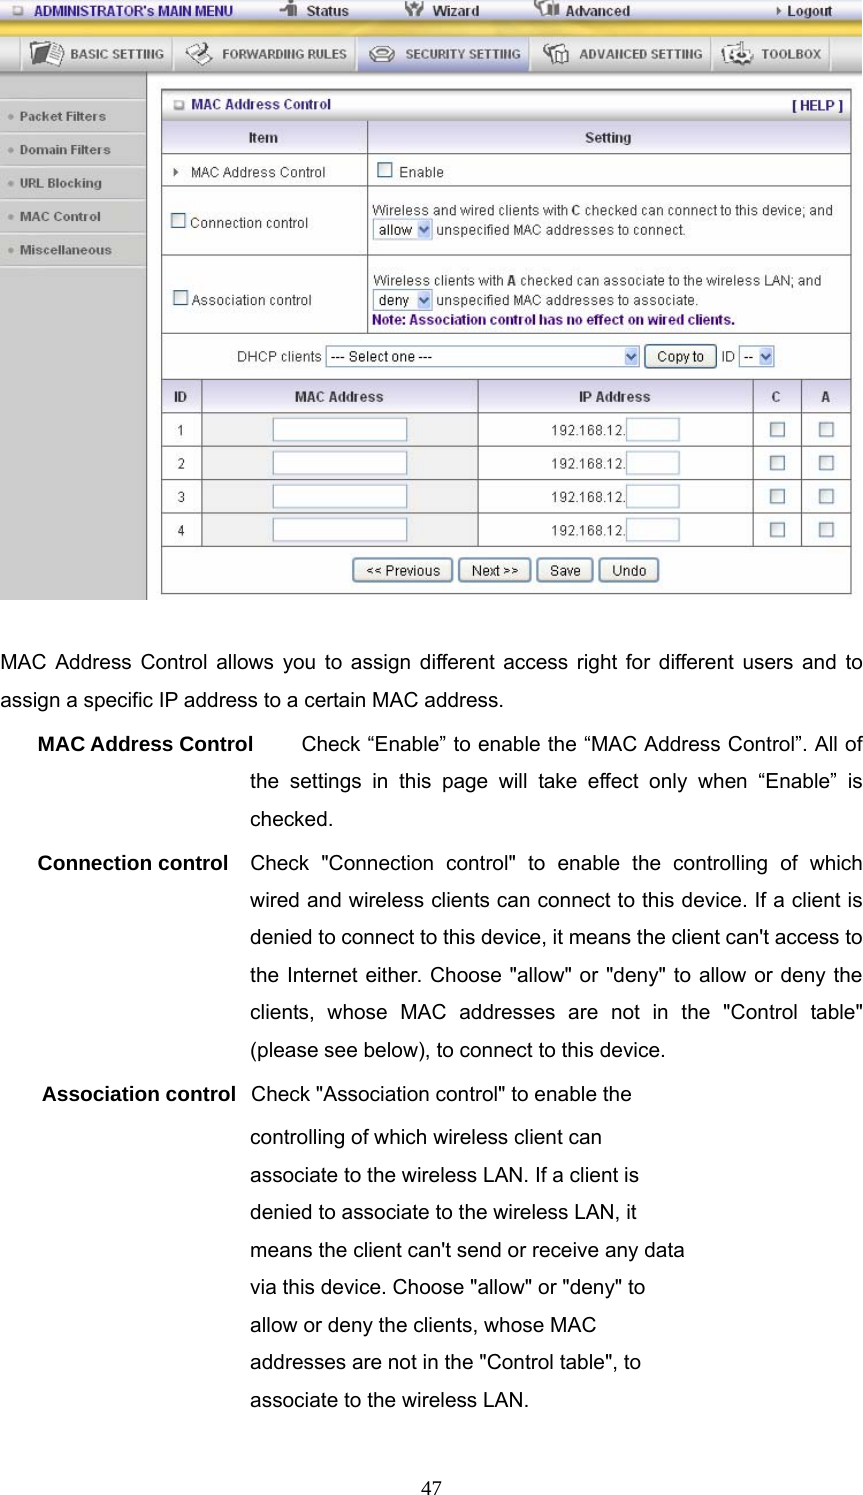  47  MAC Address Control allows you to assign different access right for different users and to assign a specific IP address to a certain MAC address. MAC Address Control  Check “Enable” to enable the “MAC Address Control”. All of the settings in this page will take effect only when “Enable” is checked. Connection control  Check &quot;Connection control&quot; to enable the controlling of which wired and wireless clients can connect to this device. If a client is denied to connect to this device, it means the client can&apos;t access to the Internet either. Choose &quot;allow&quot; or &quot;deny&quot; to allow or deny the clients, whose MAC addresses are not in the &quot;Control table&quot; (please see below), to connect to this device. Association control  Check &quot;Association control&quot; to enable the controlling of which wireless client can associate to the wireless LAN. If a client is denied to associate to the wireless LAN, it means the client can&apos;t send or receive any data via this device. Choose &quot;allow&quot; or &quot;deny&quot; to allow or deny the clients, whose MAC addresses are not in the &quot;Control table&quot;, to associate to the wireless LAN. 